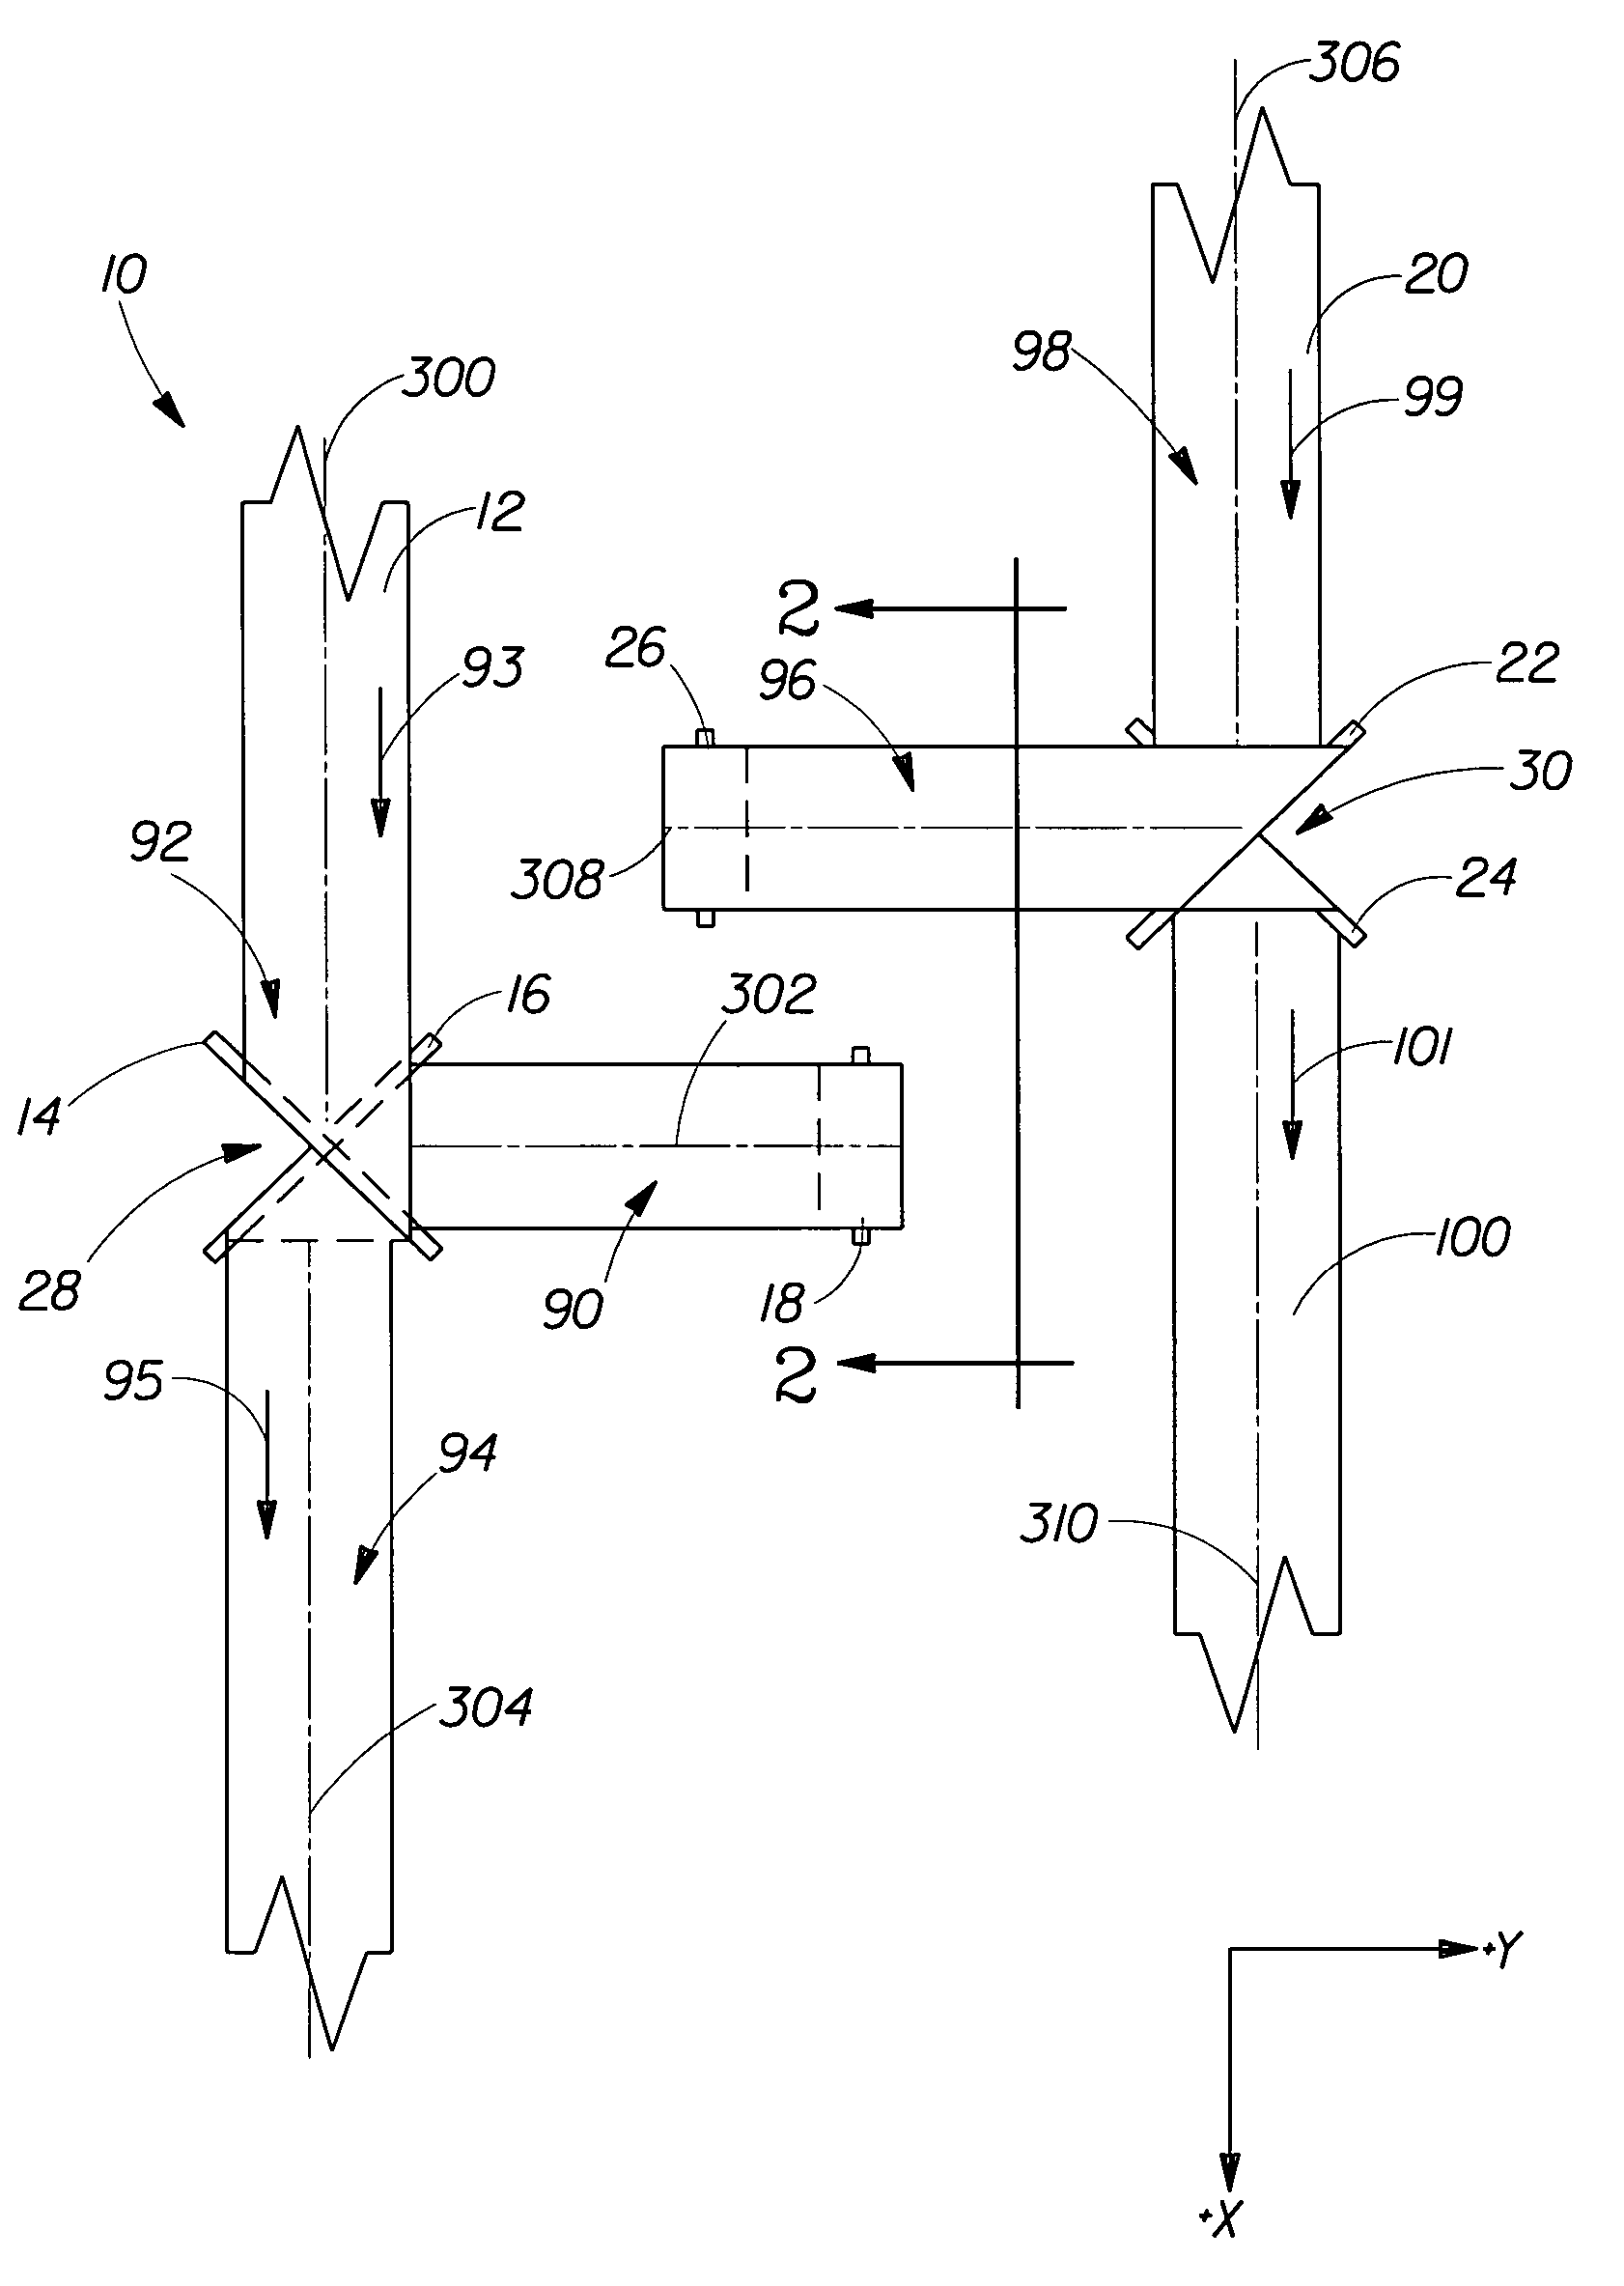 Method of placing a material transversely on a moving web